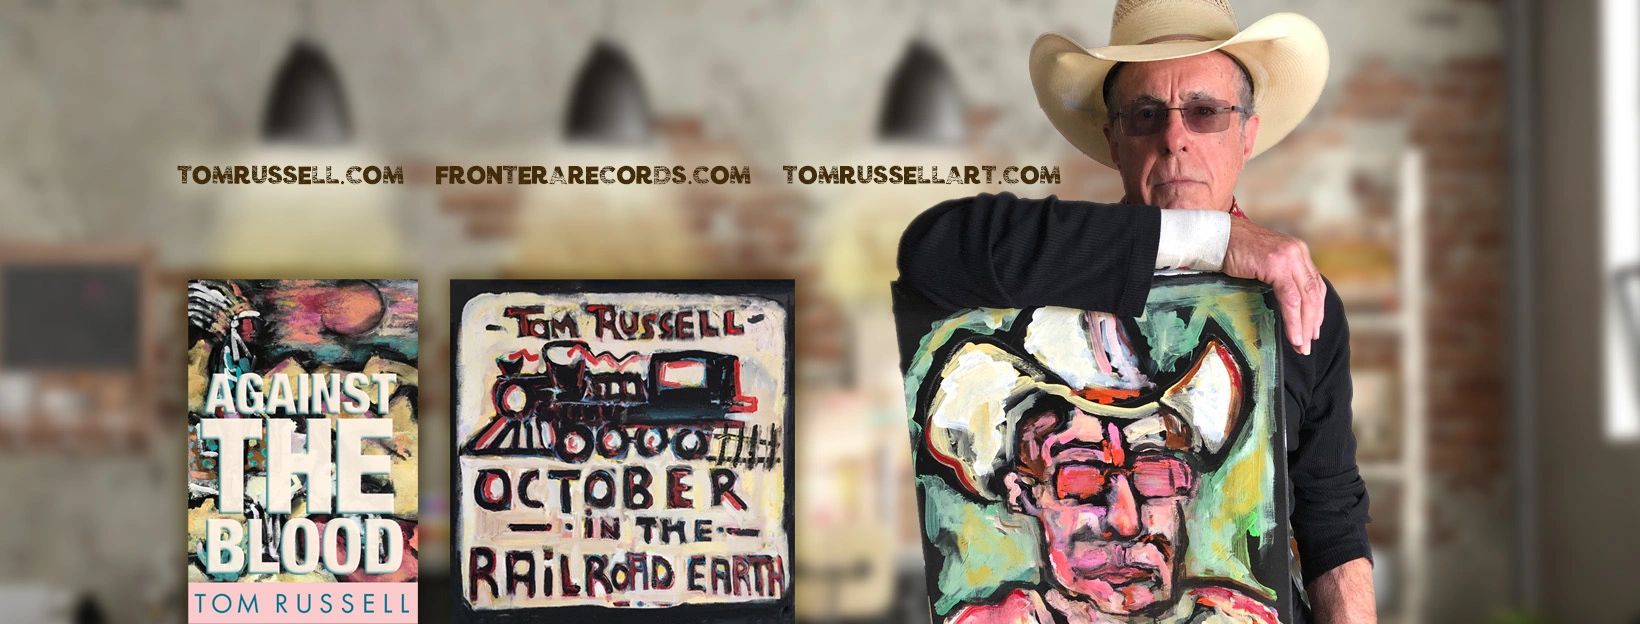 tom russell tour